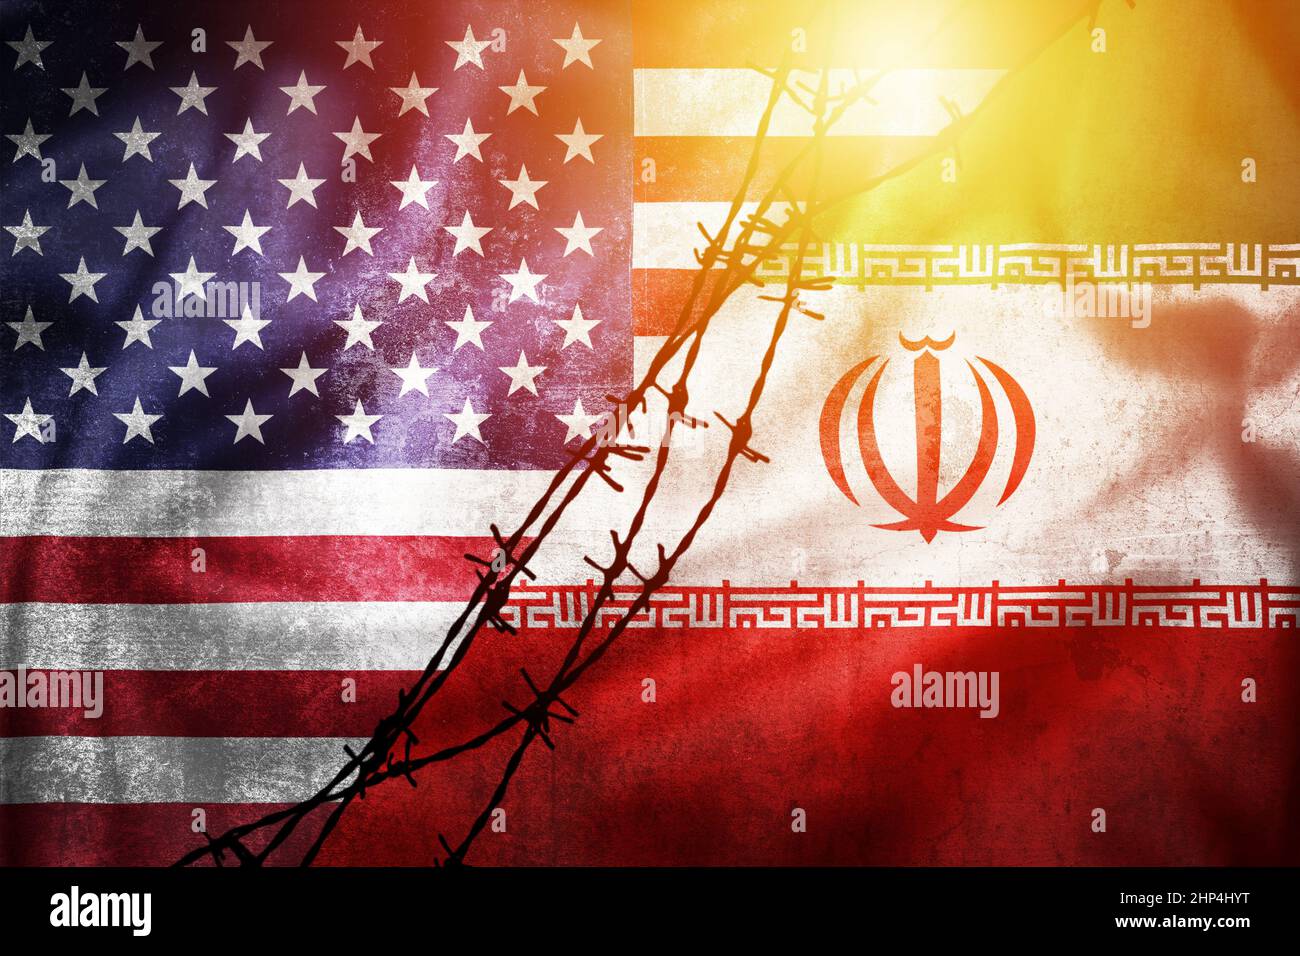 Grunge flags of Iran and USA divided by barb wire sun haze illustration, concept of tense relations between Iran and the USA Stock Photo